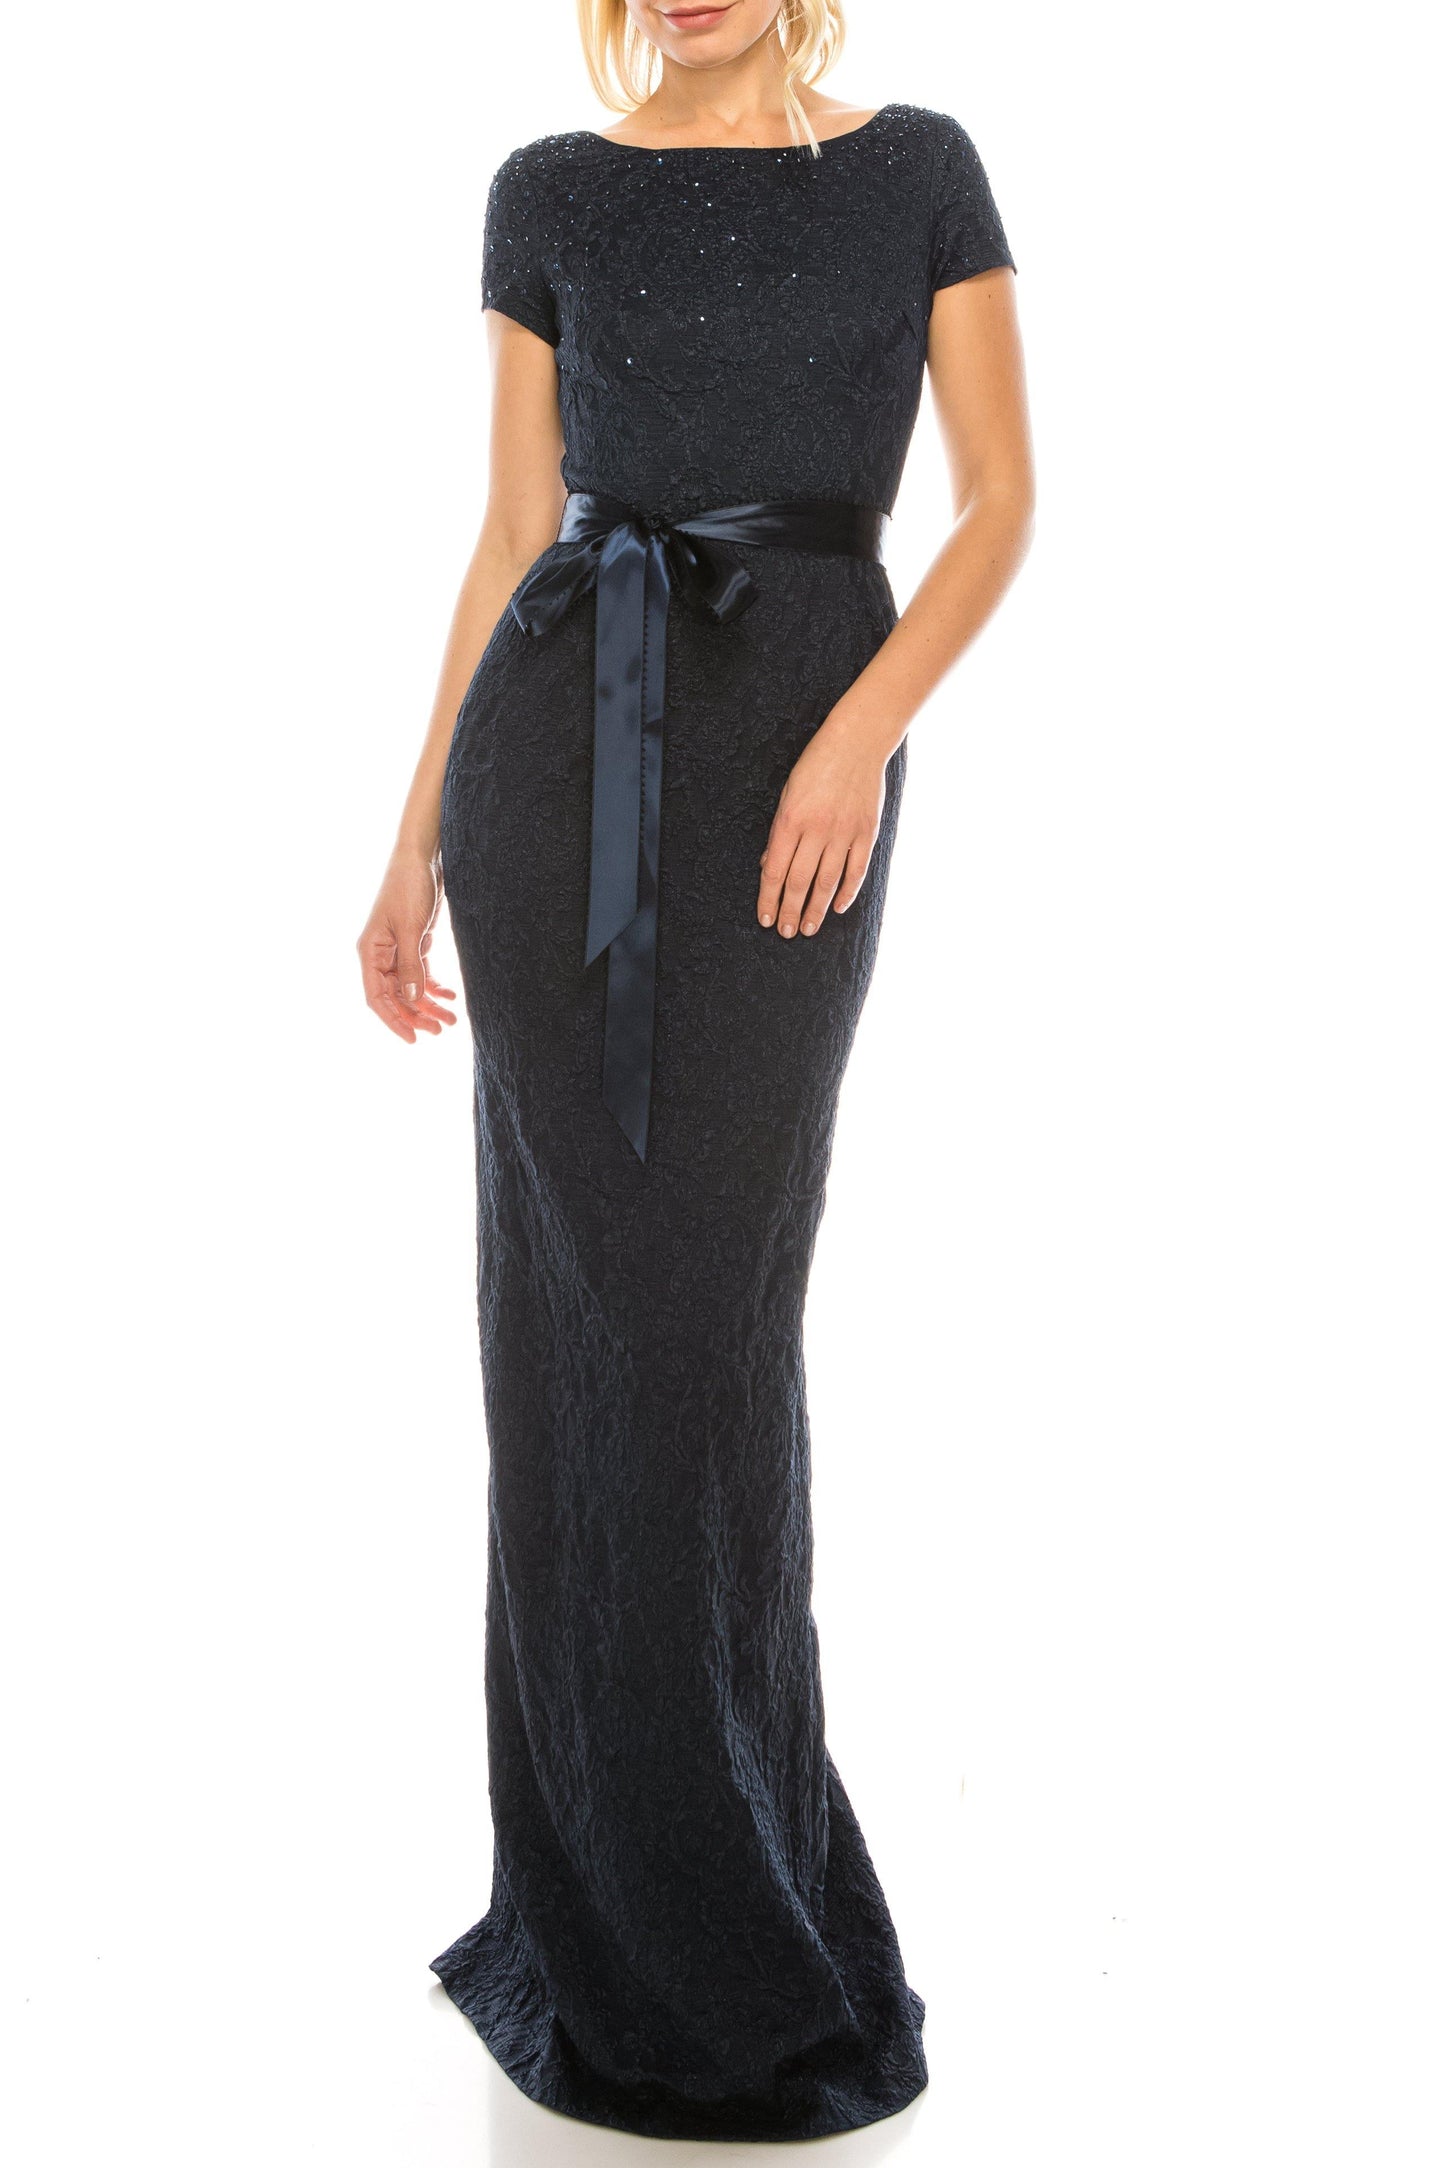 Adrianna Papell Long Formal Jacquard Evening Dress - The Dress Outlet